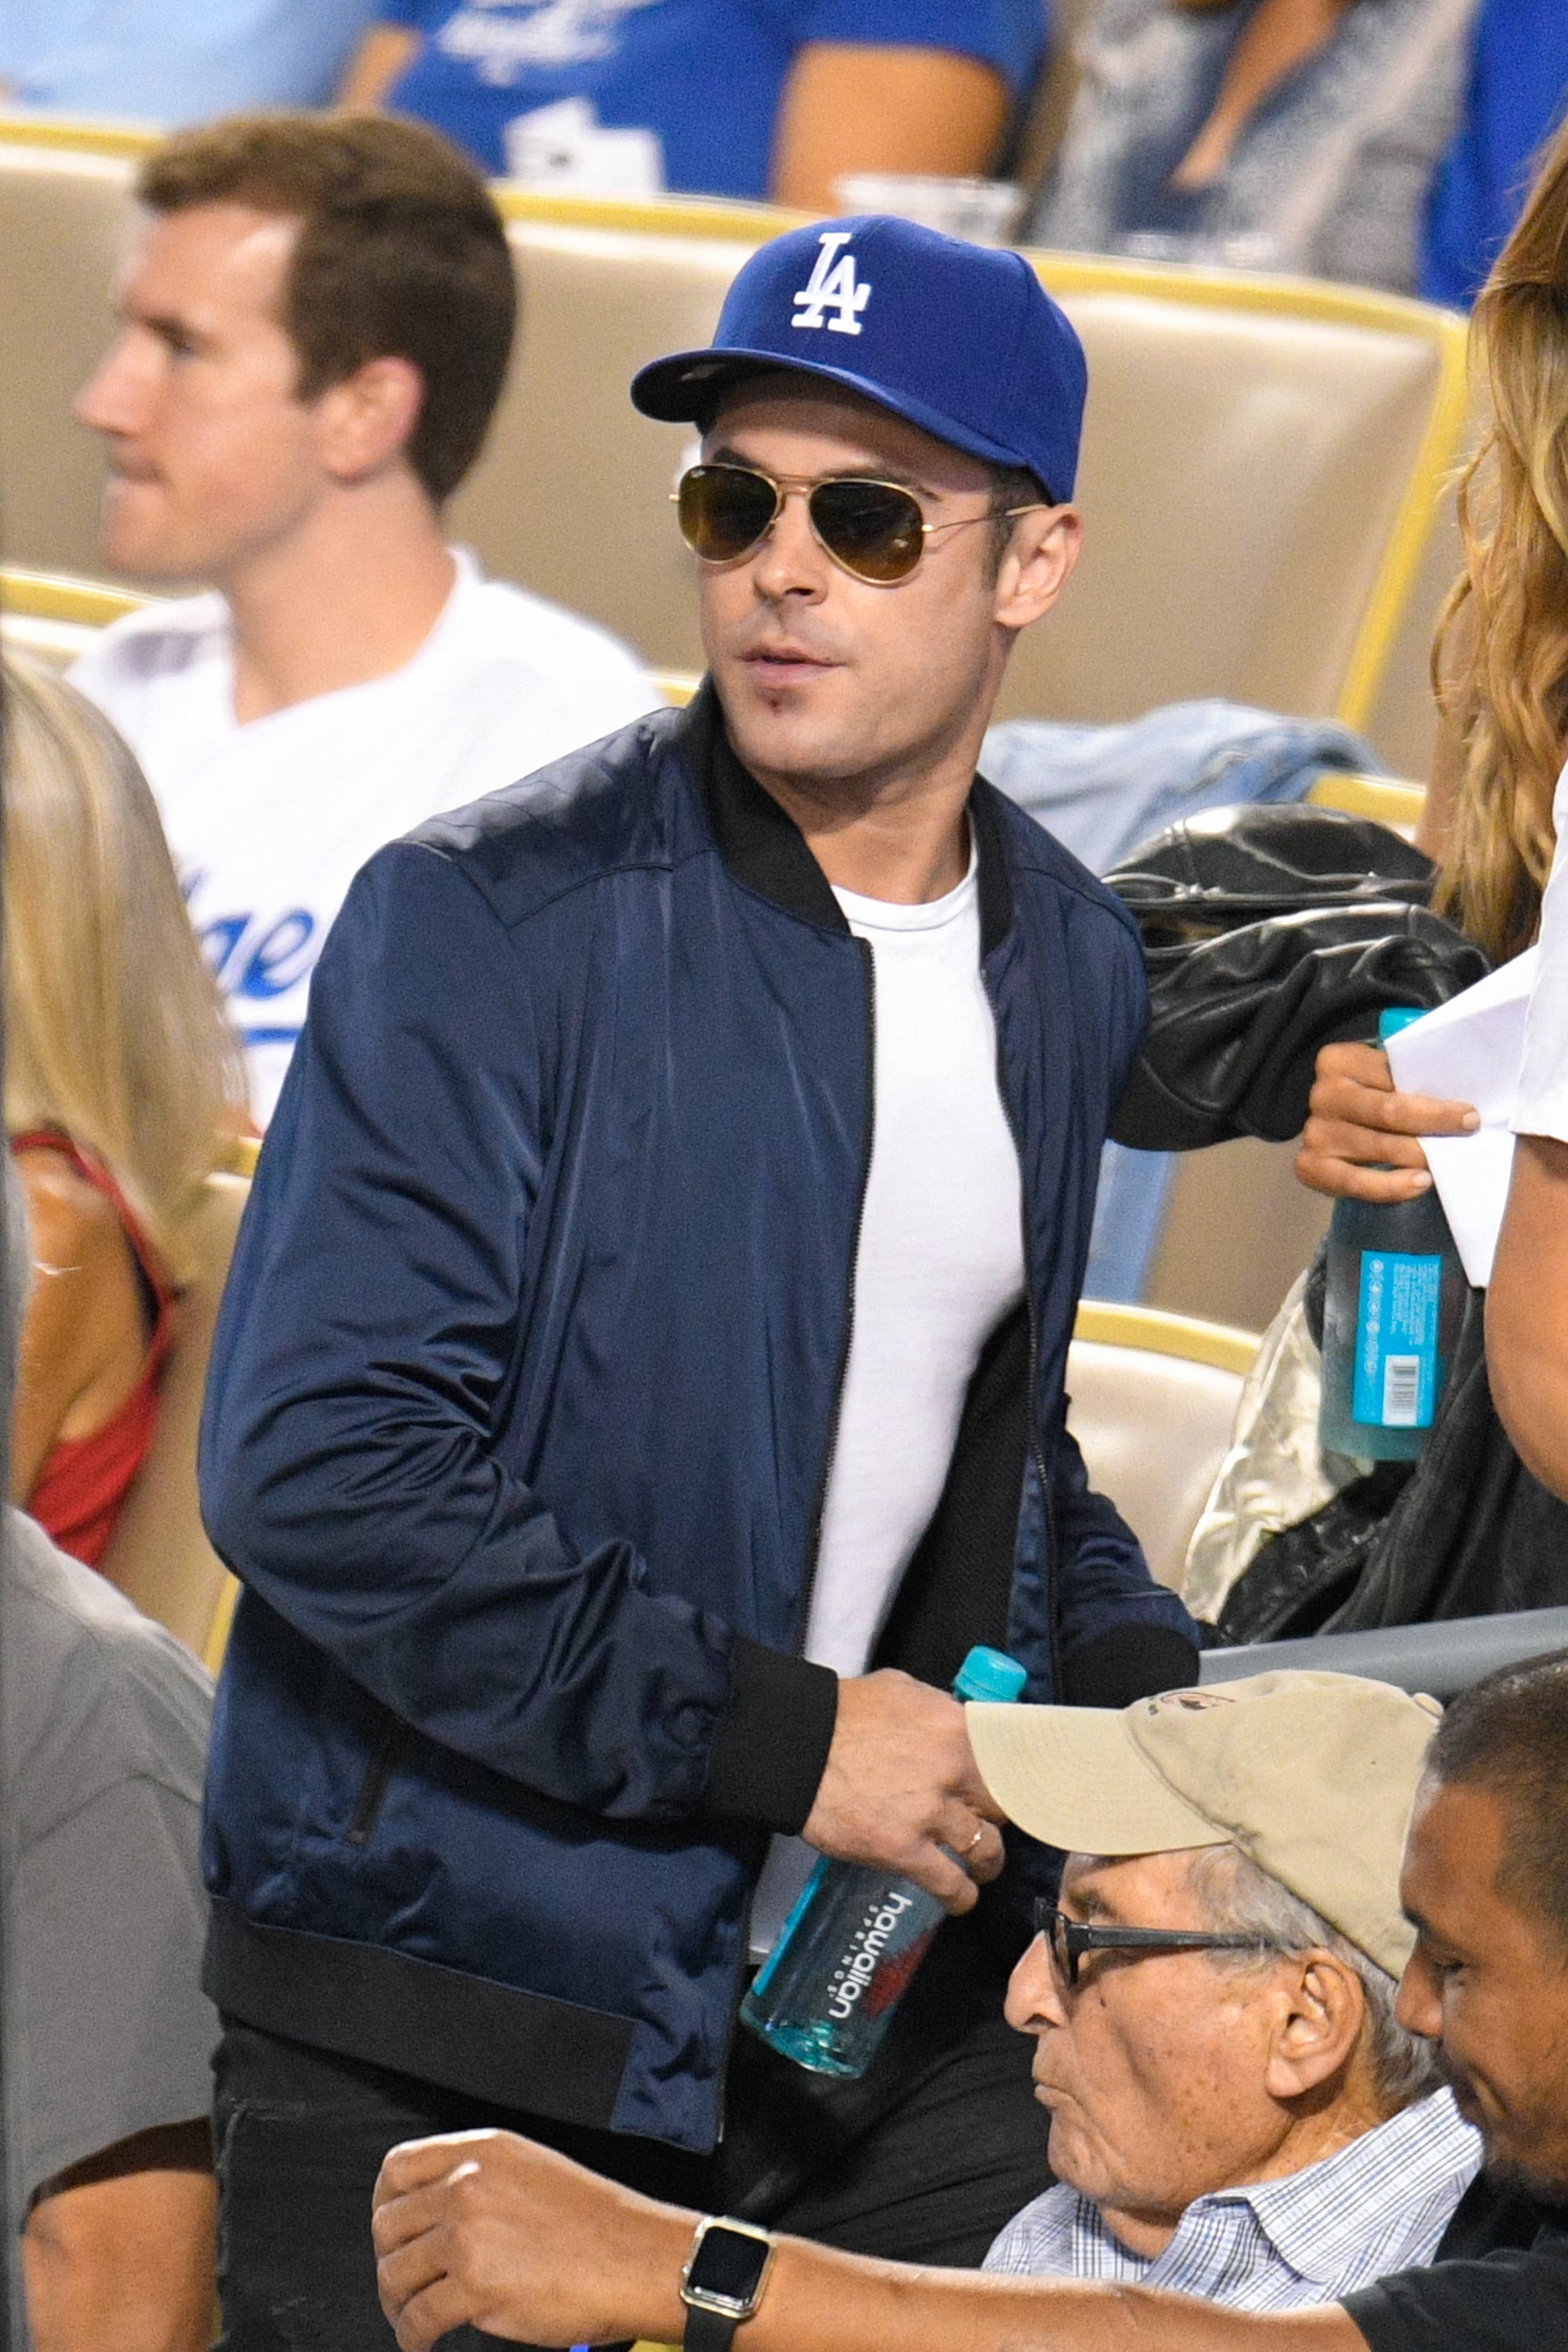 Zac Efron La Dodgers Game August 24, 2016 – Star Style Man